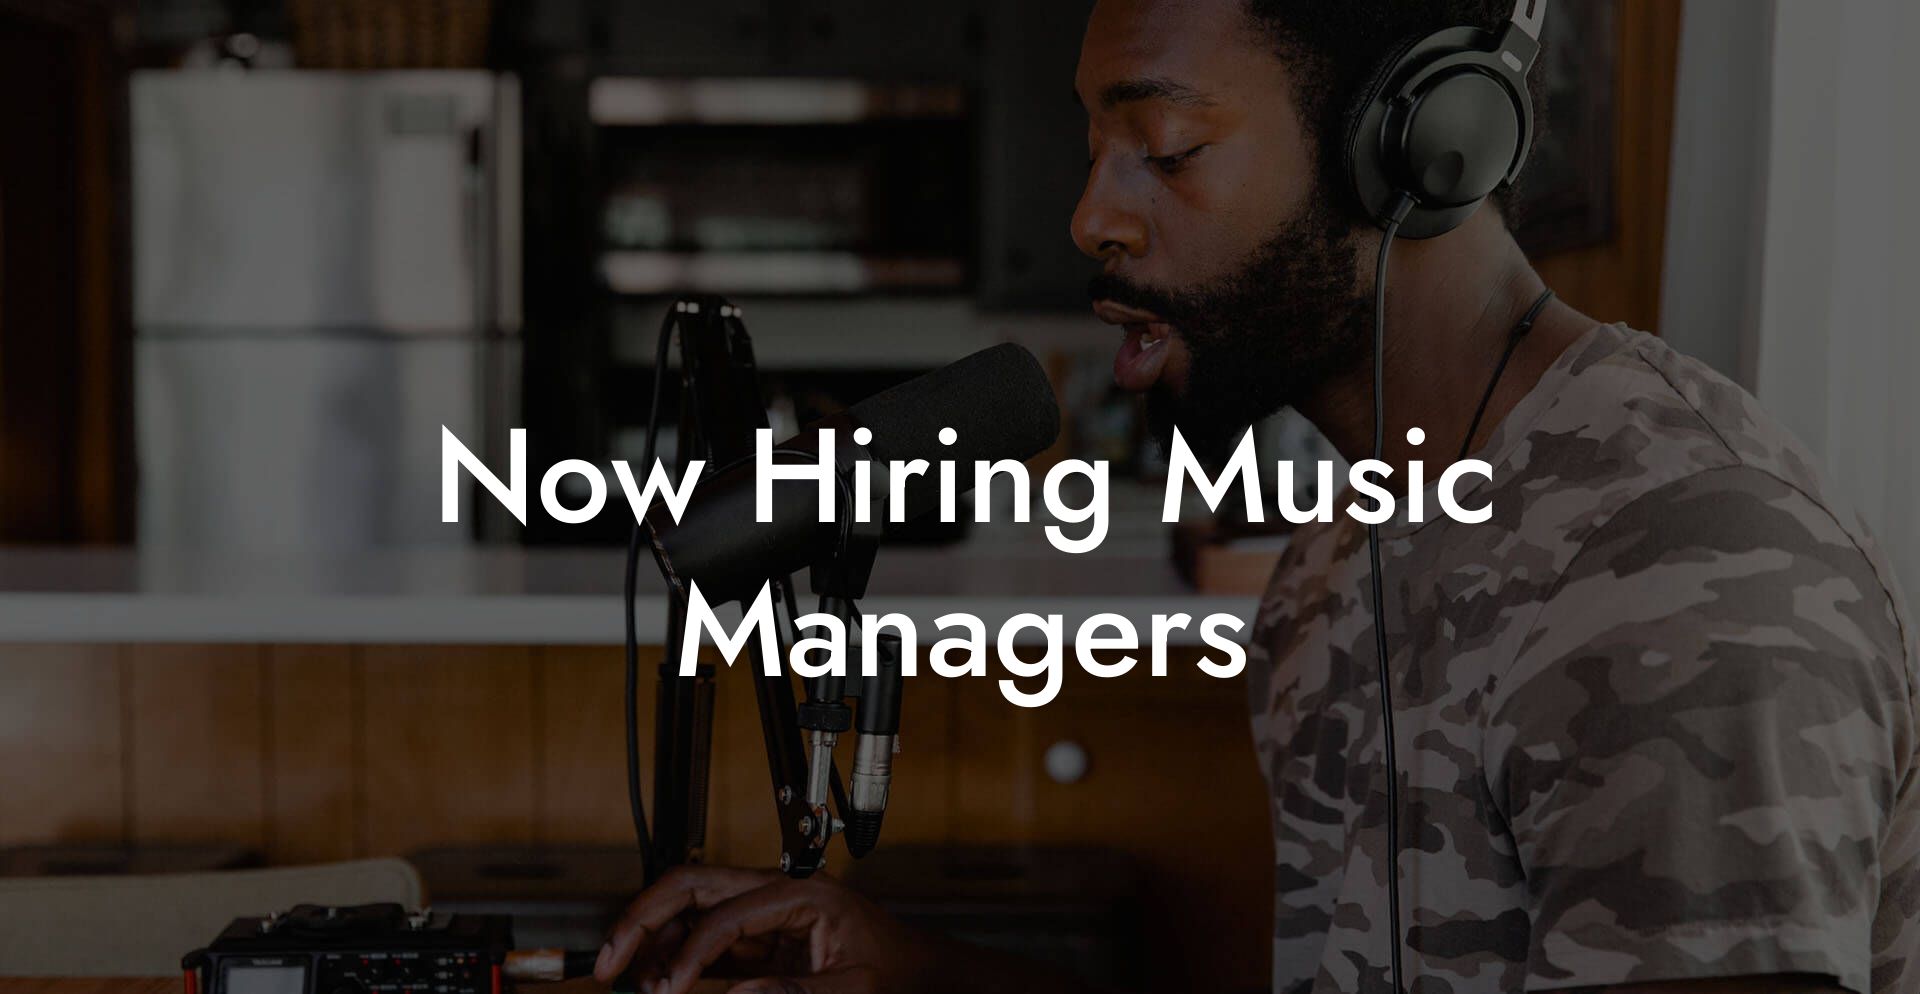 Now Hiring Music Managers